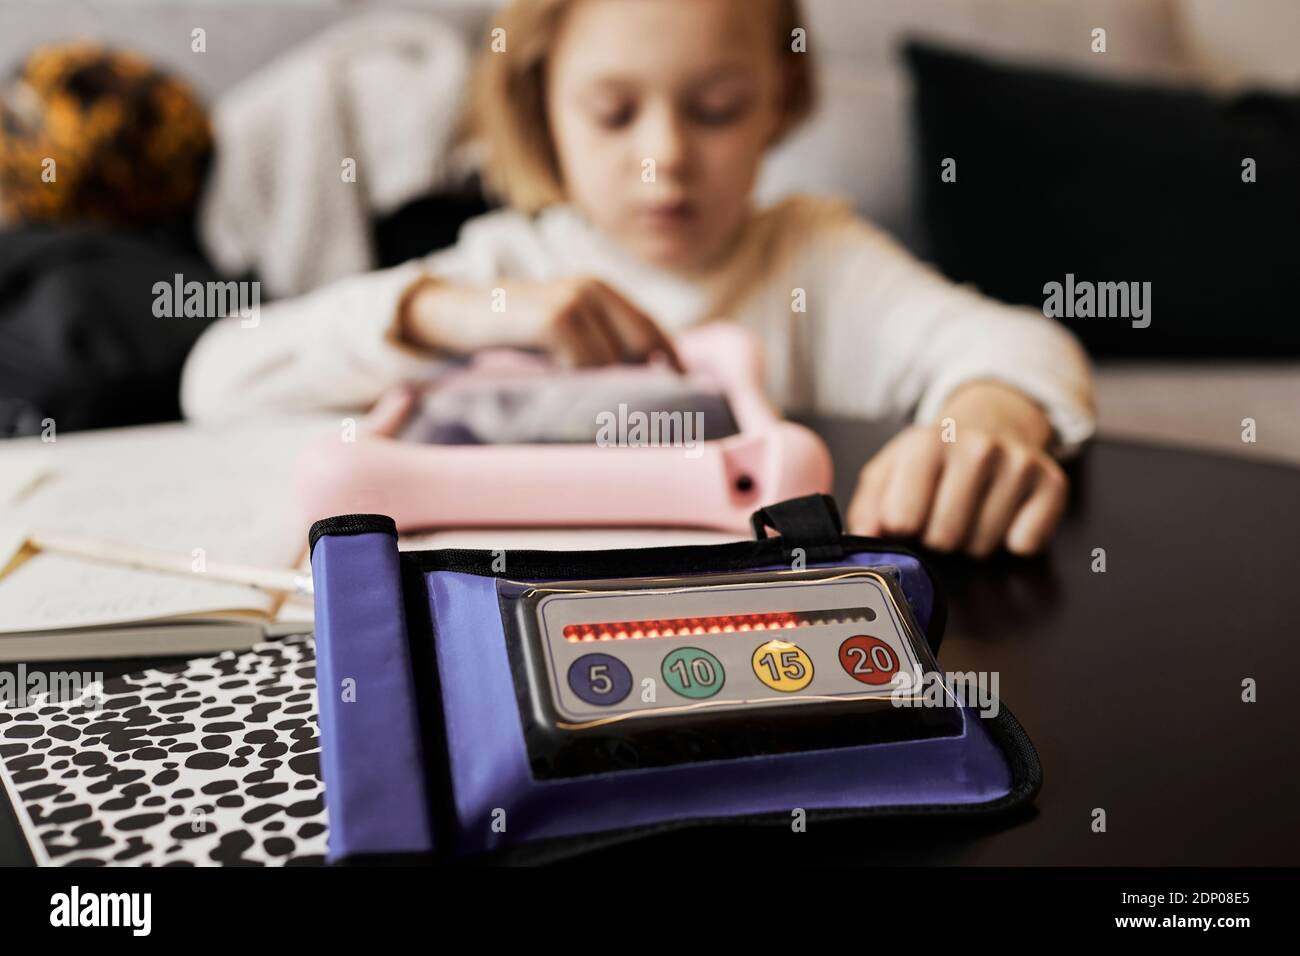 High angle view of educational electronic game, child writing on background Stock Photo